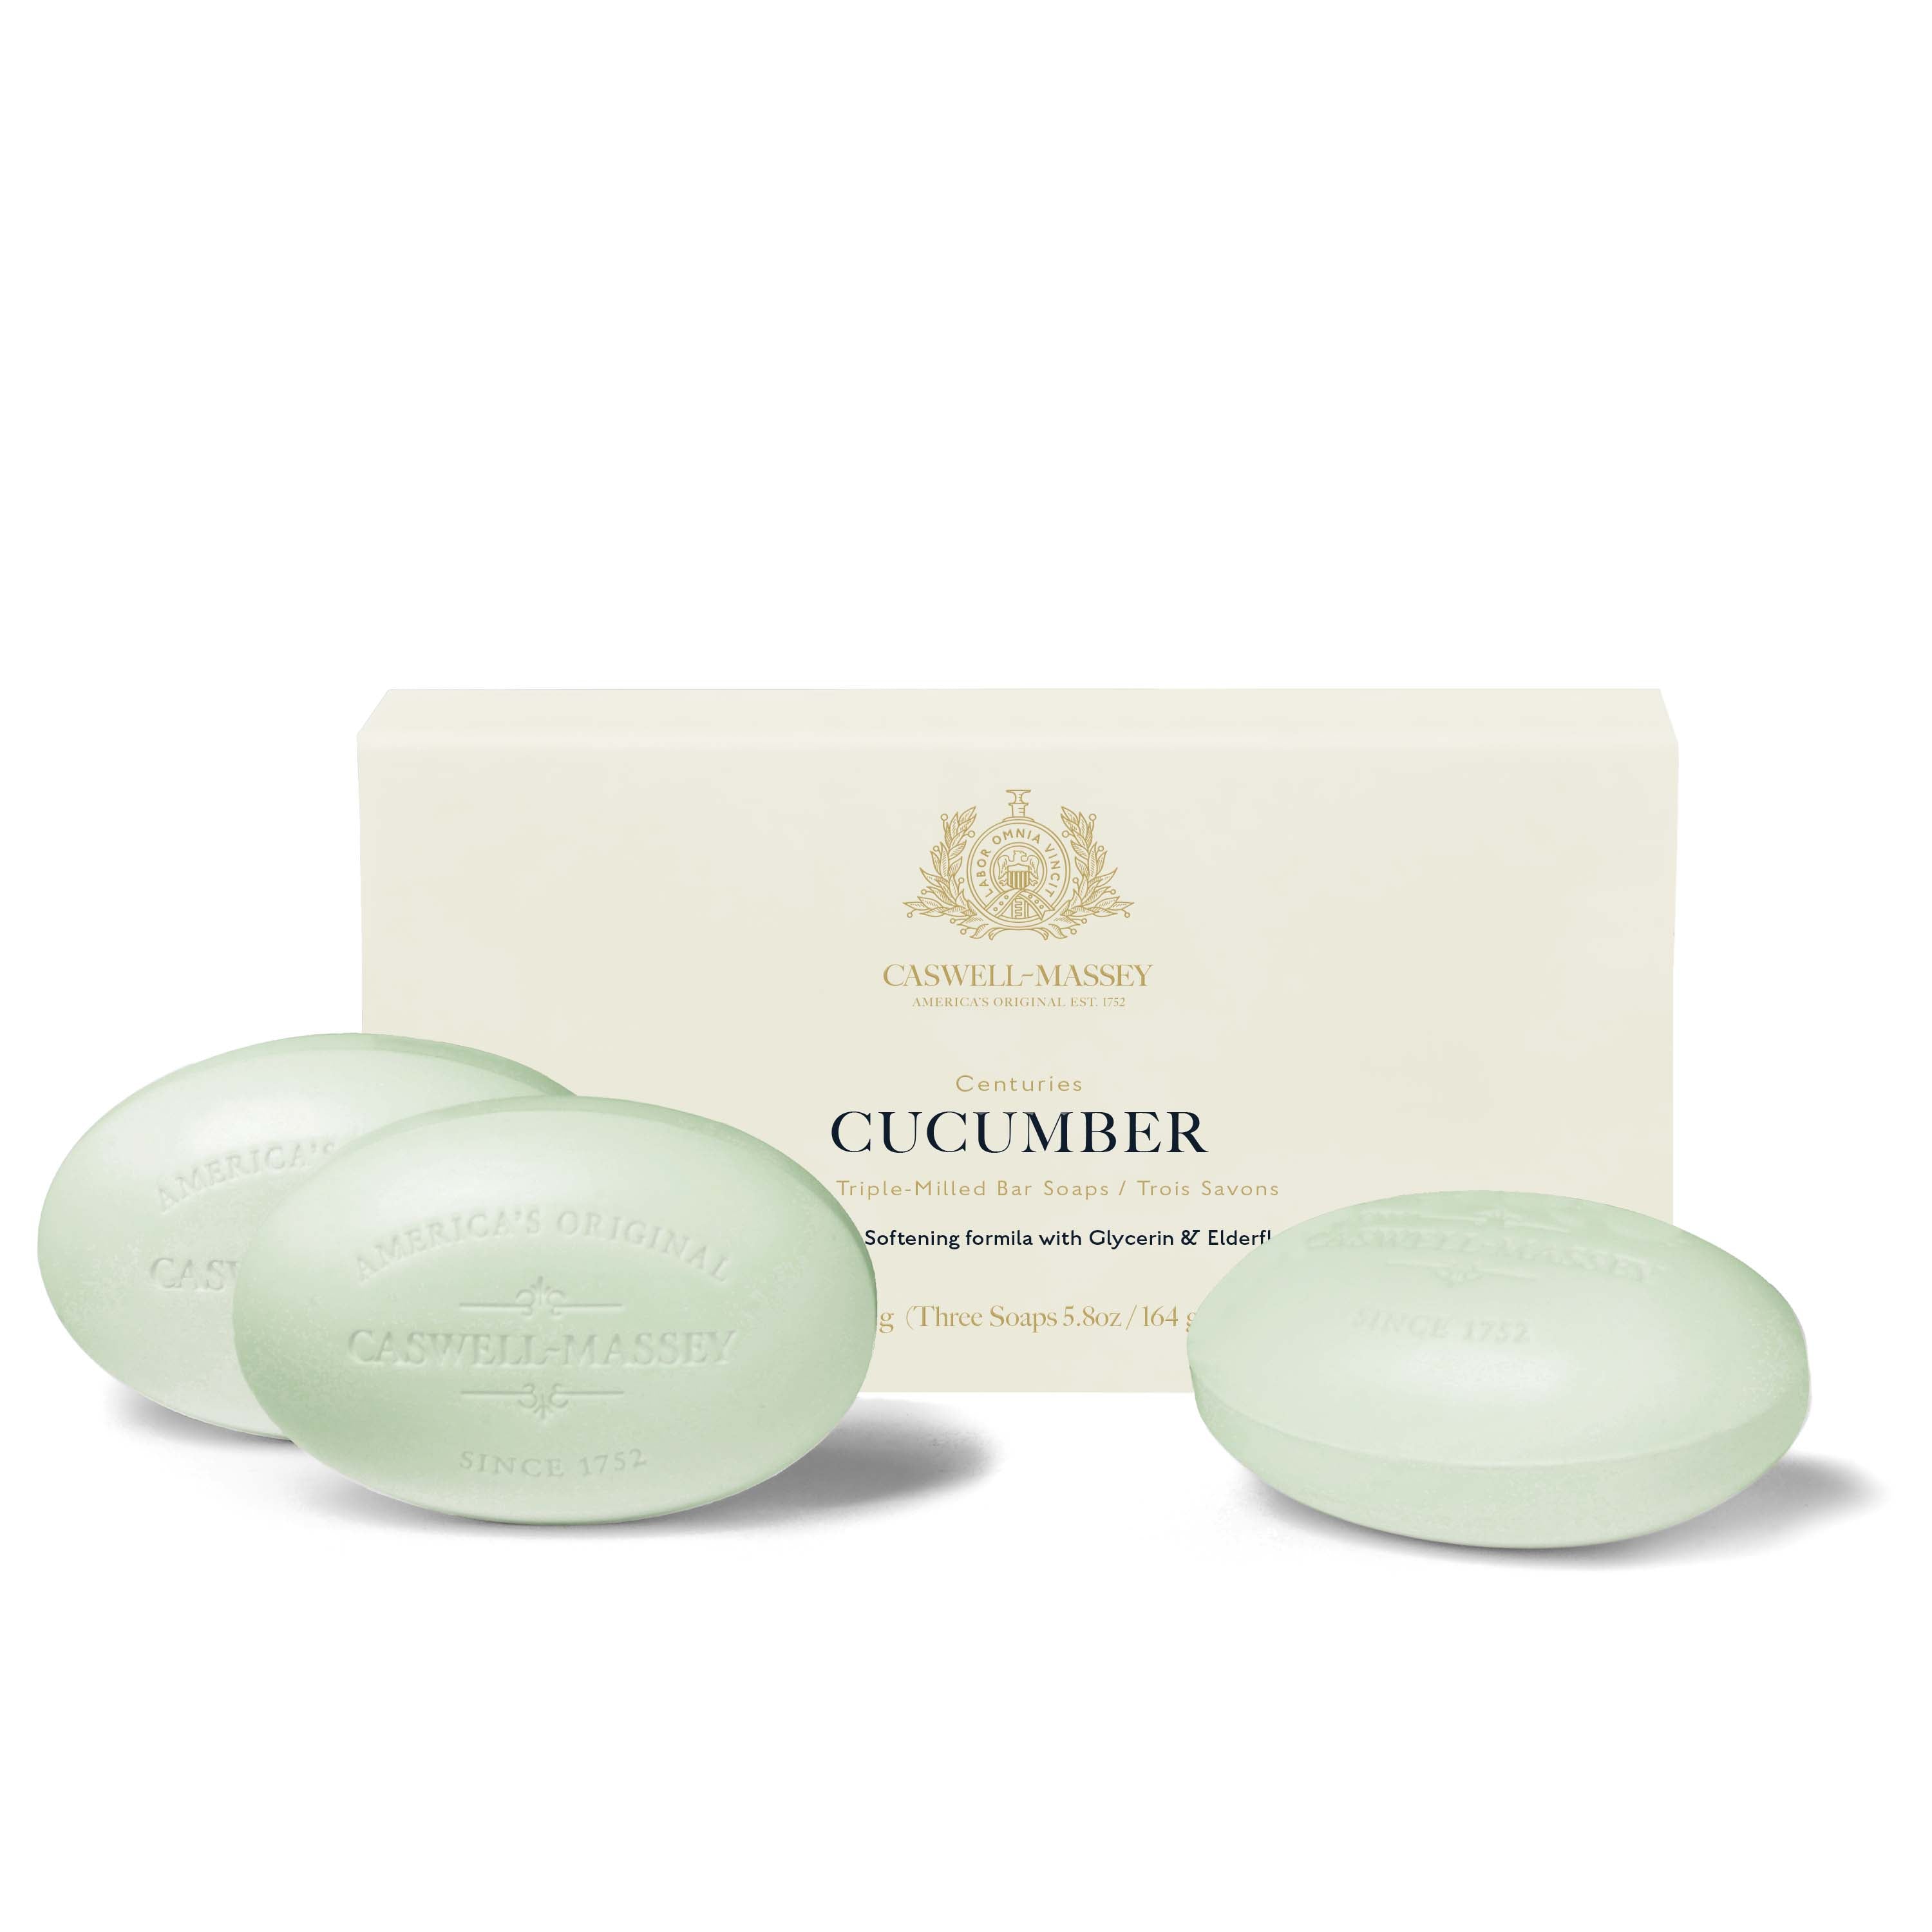 Caswell-Massey® Centuries Cucumber 3-Soap Gift Set shown with cream gift box alongside green bars of soap